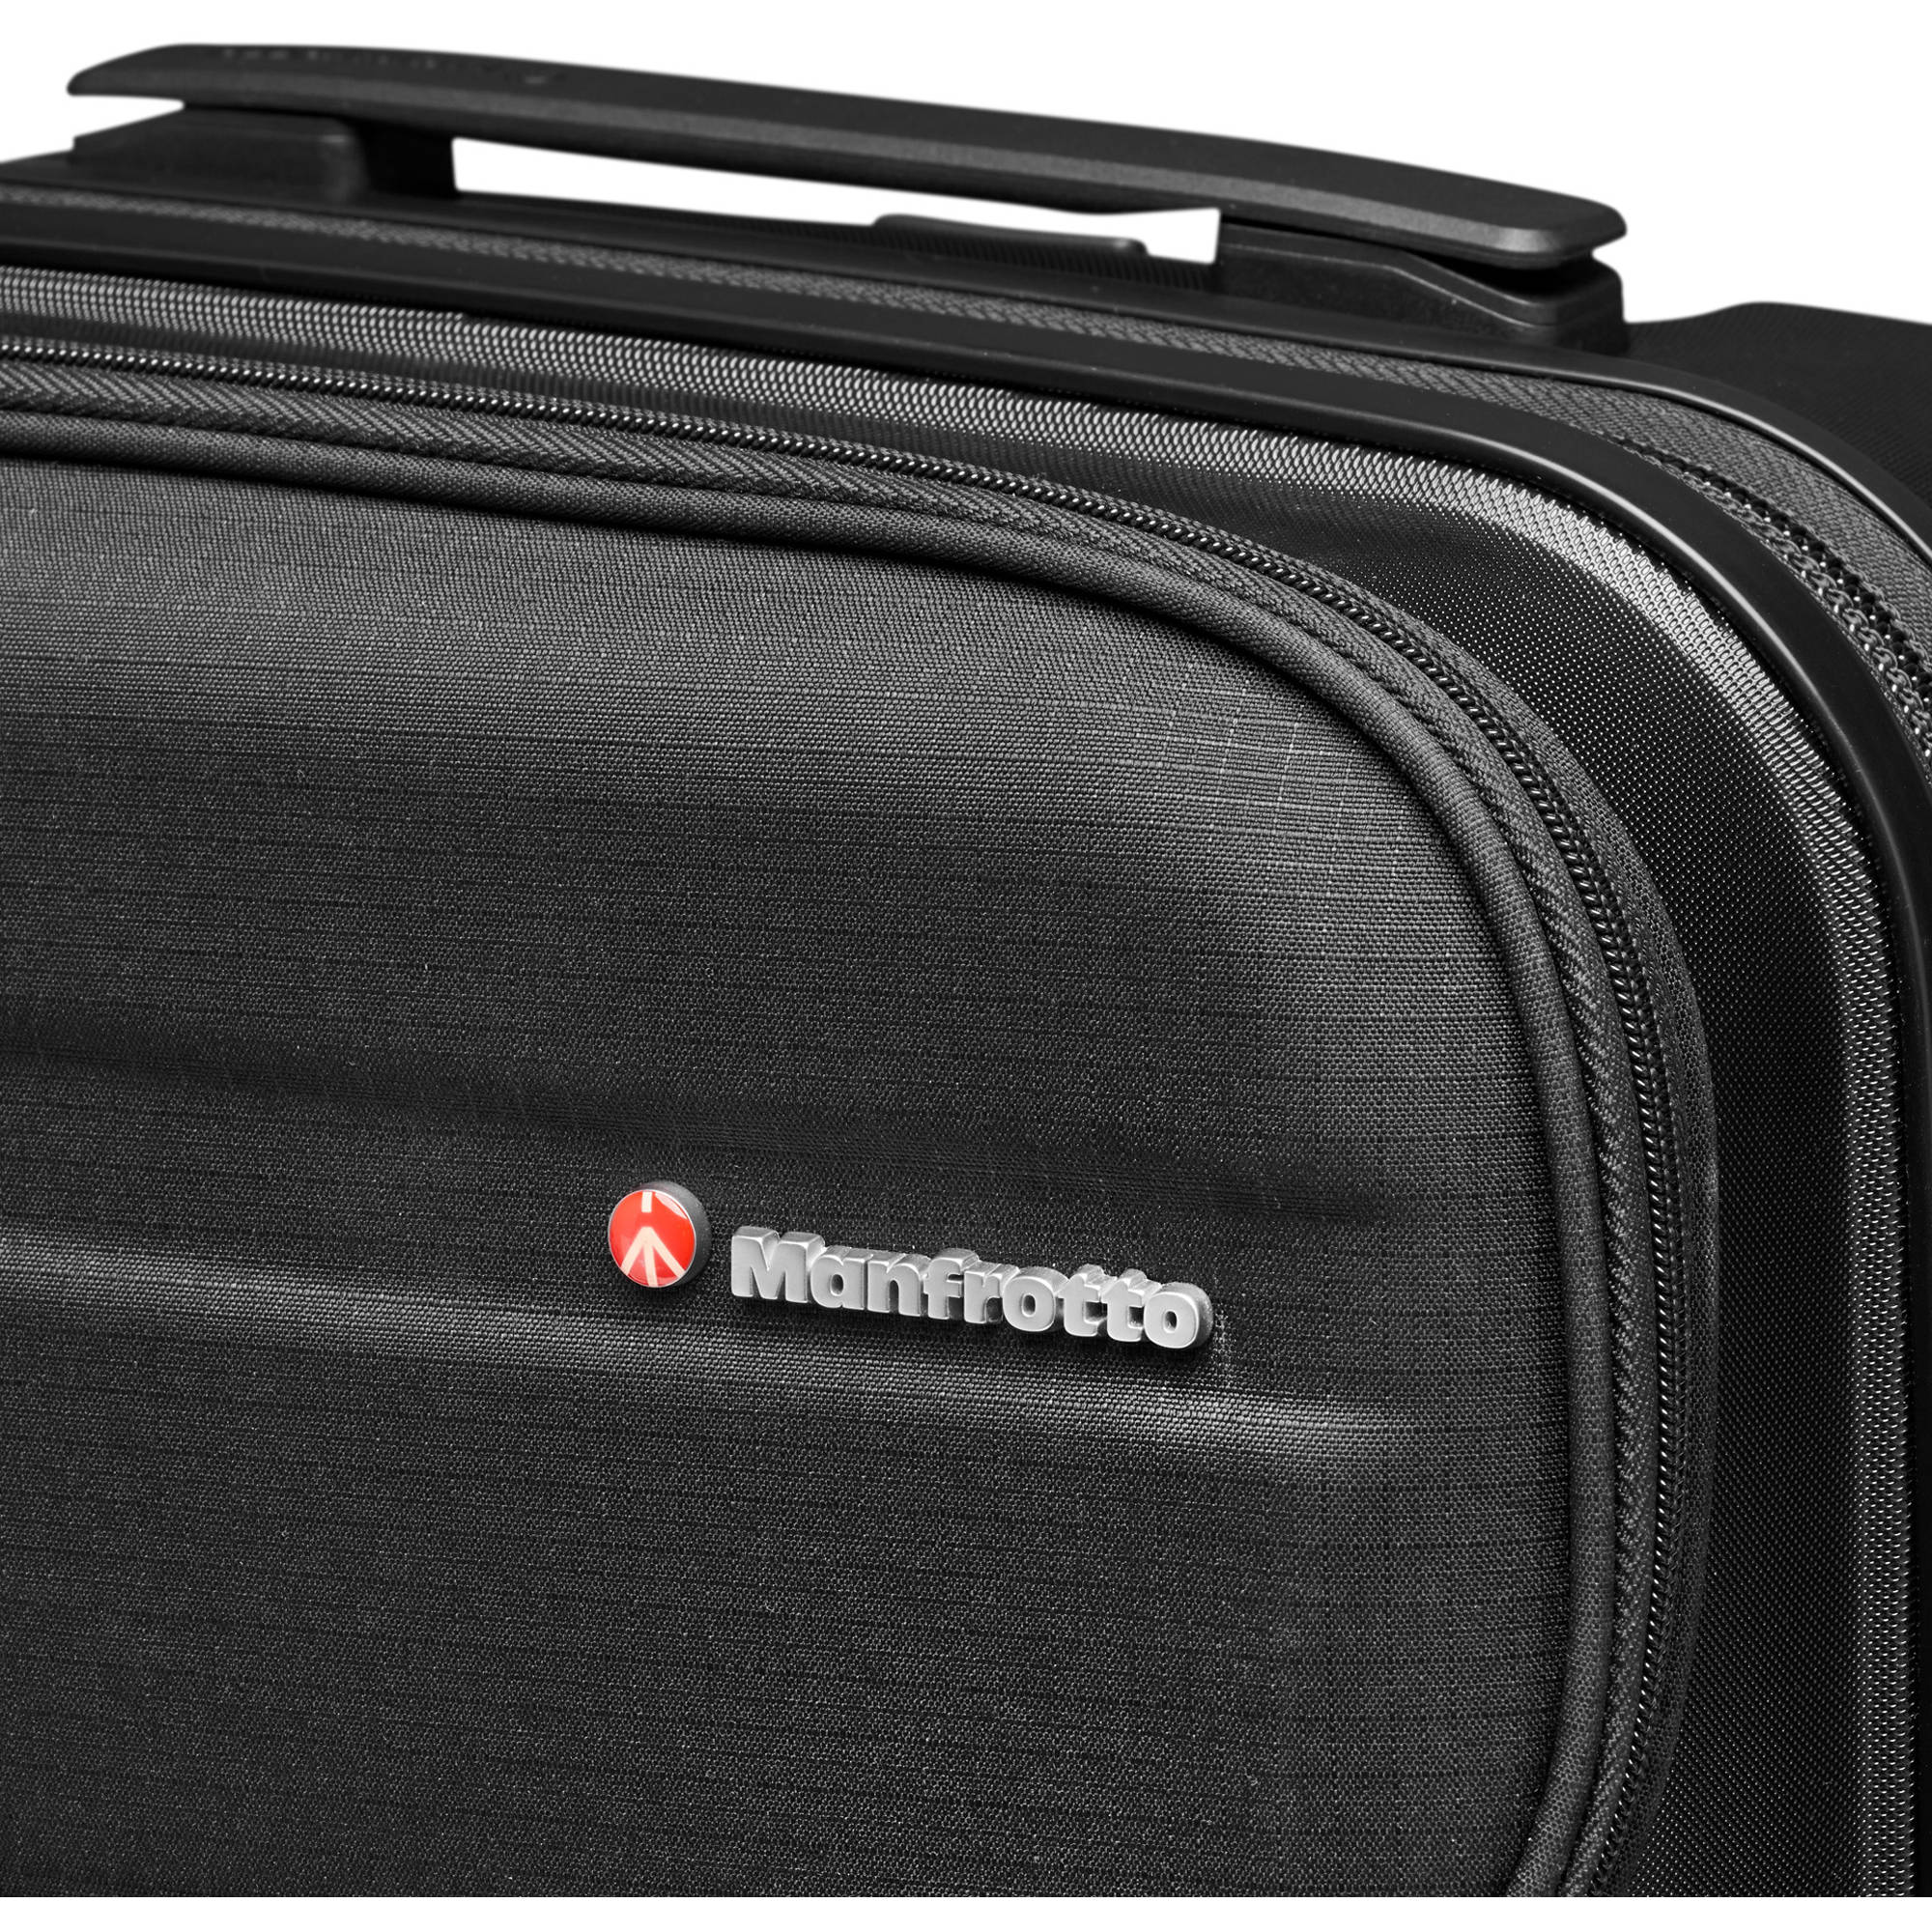 Manfrotto Roller bag